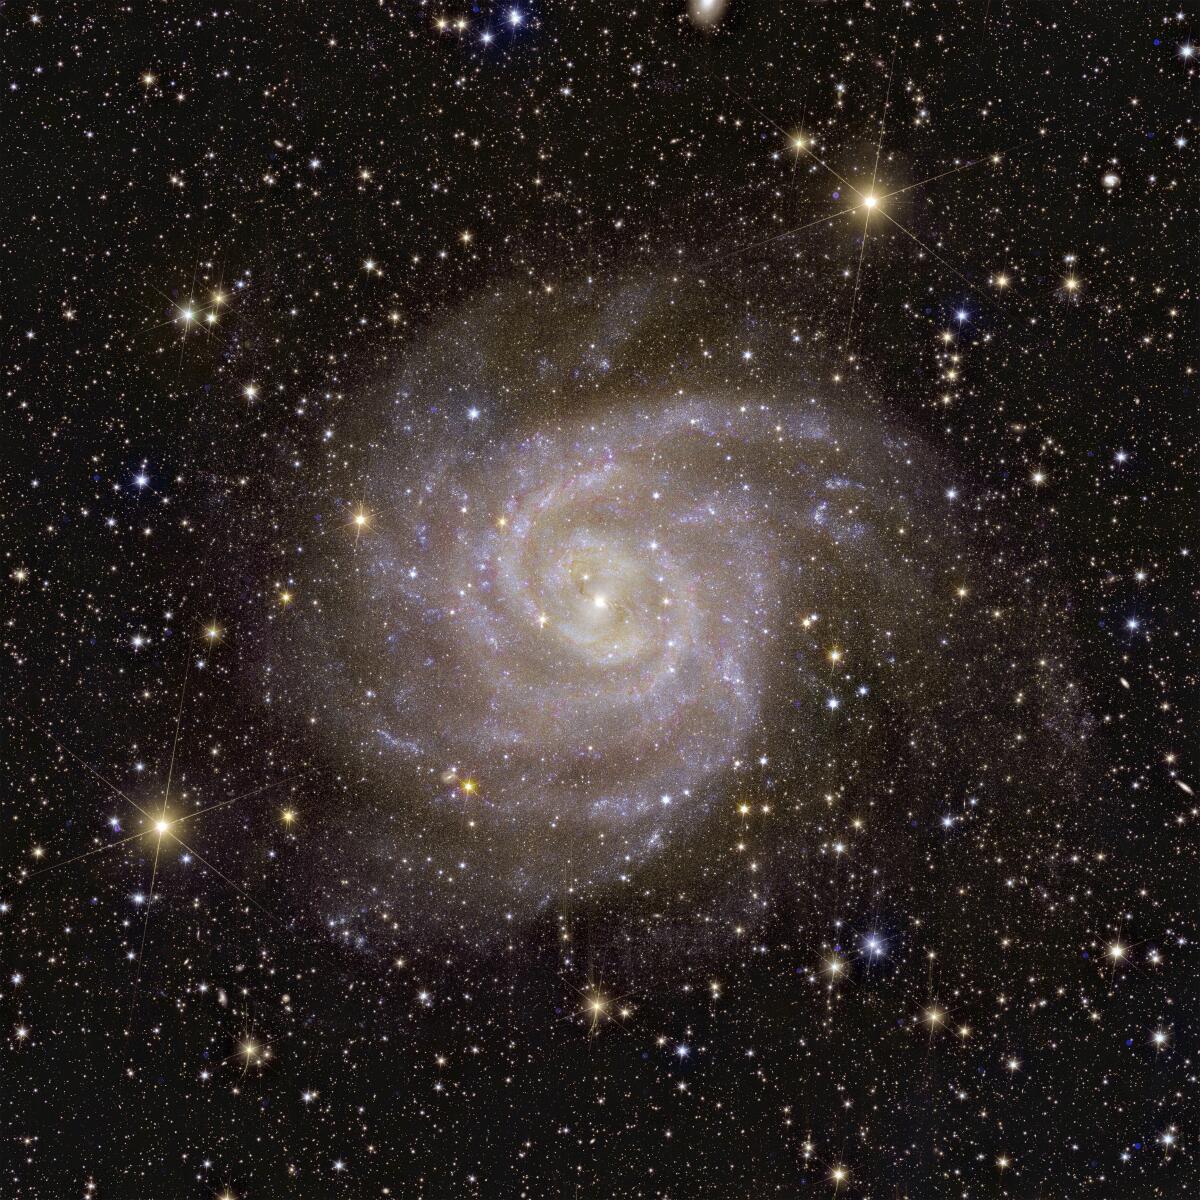 The galaxy called IC 342, as seen by the European Space Agency's Euclid telescope